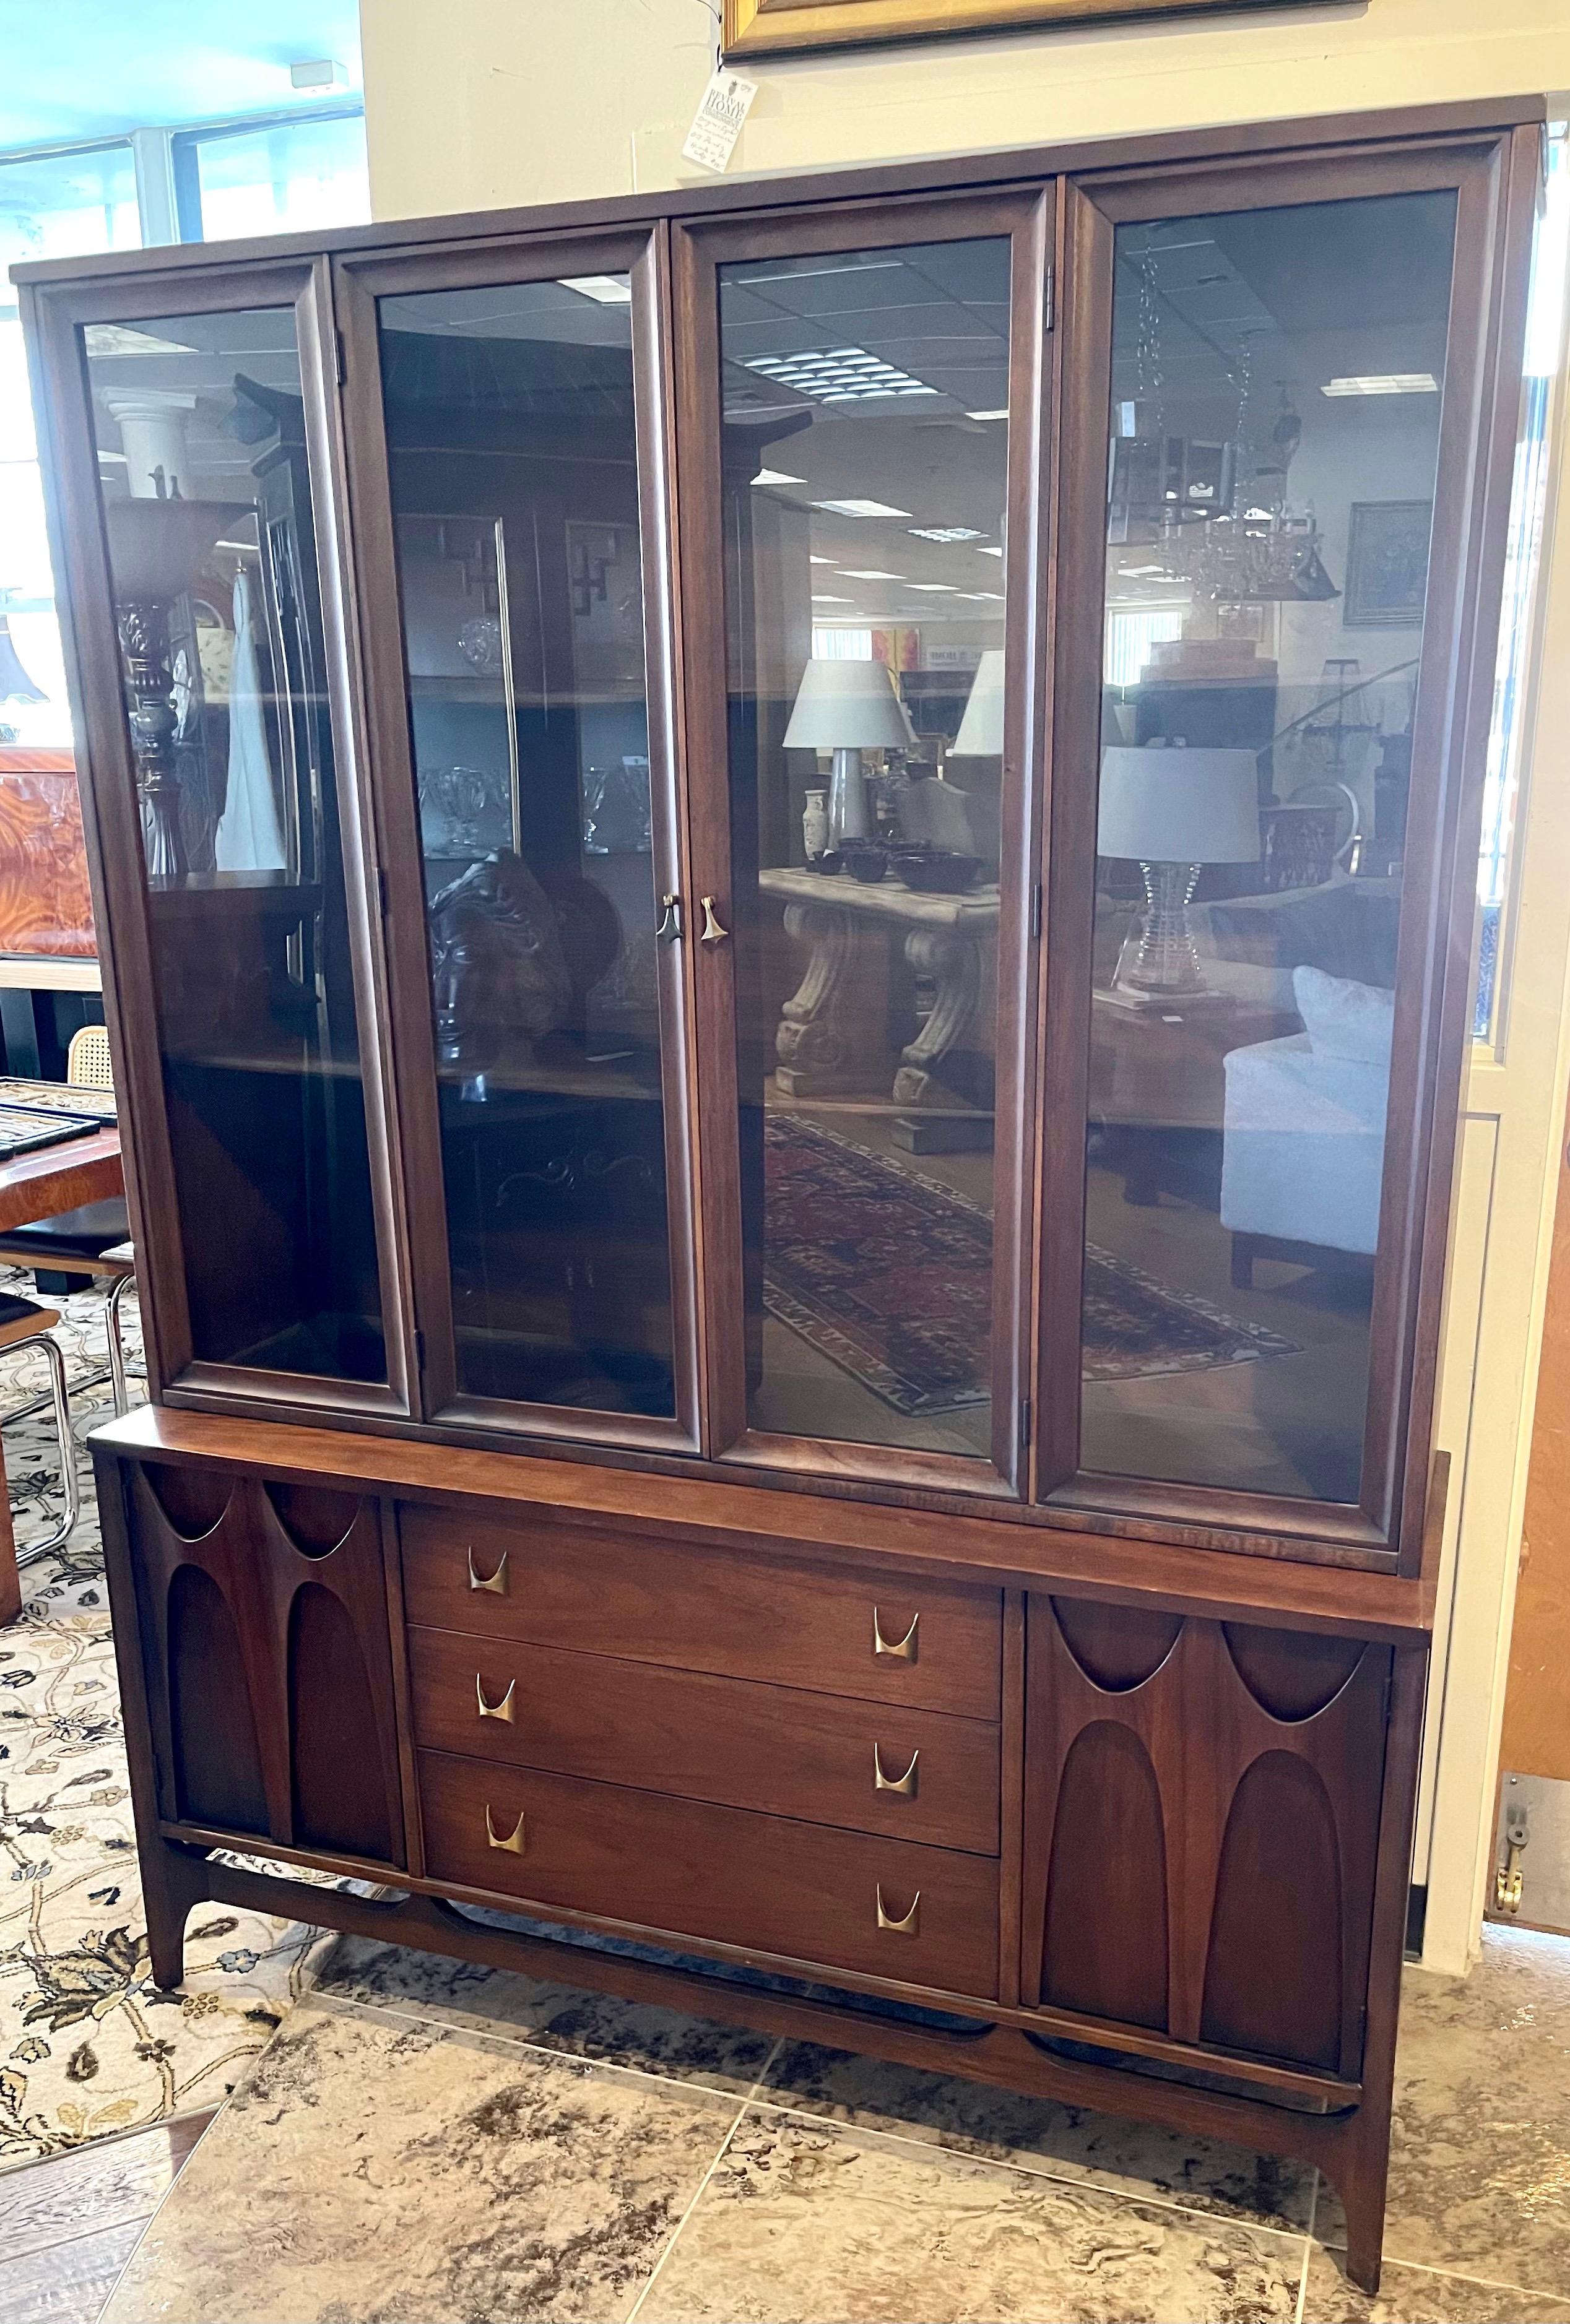 Rare and sought after Broyhill Brasilia two piece sculpted walnut breakfront. Part of a full dining room set we will me selling exclusively on 1stDibs this week. Great scale and lines to die for. All hallmarks present.